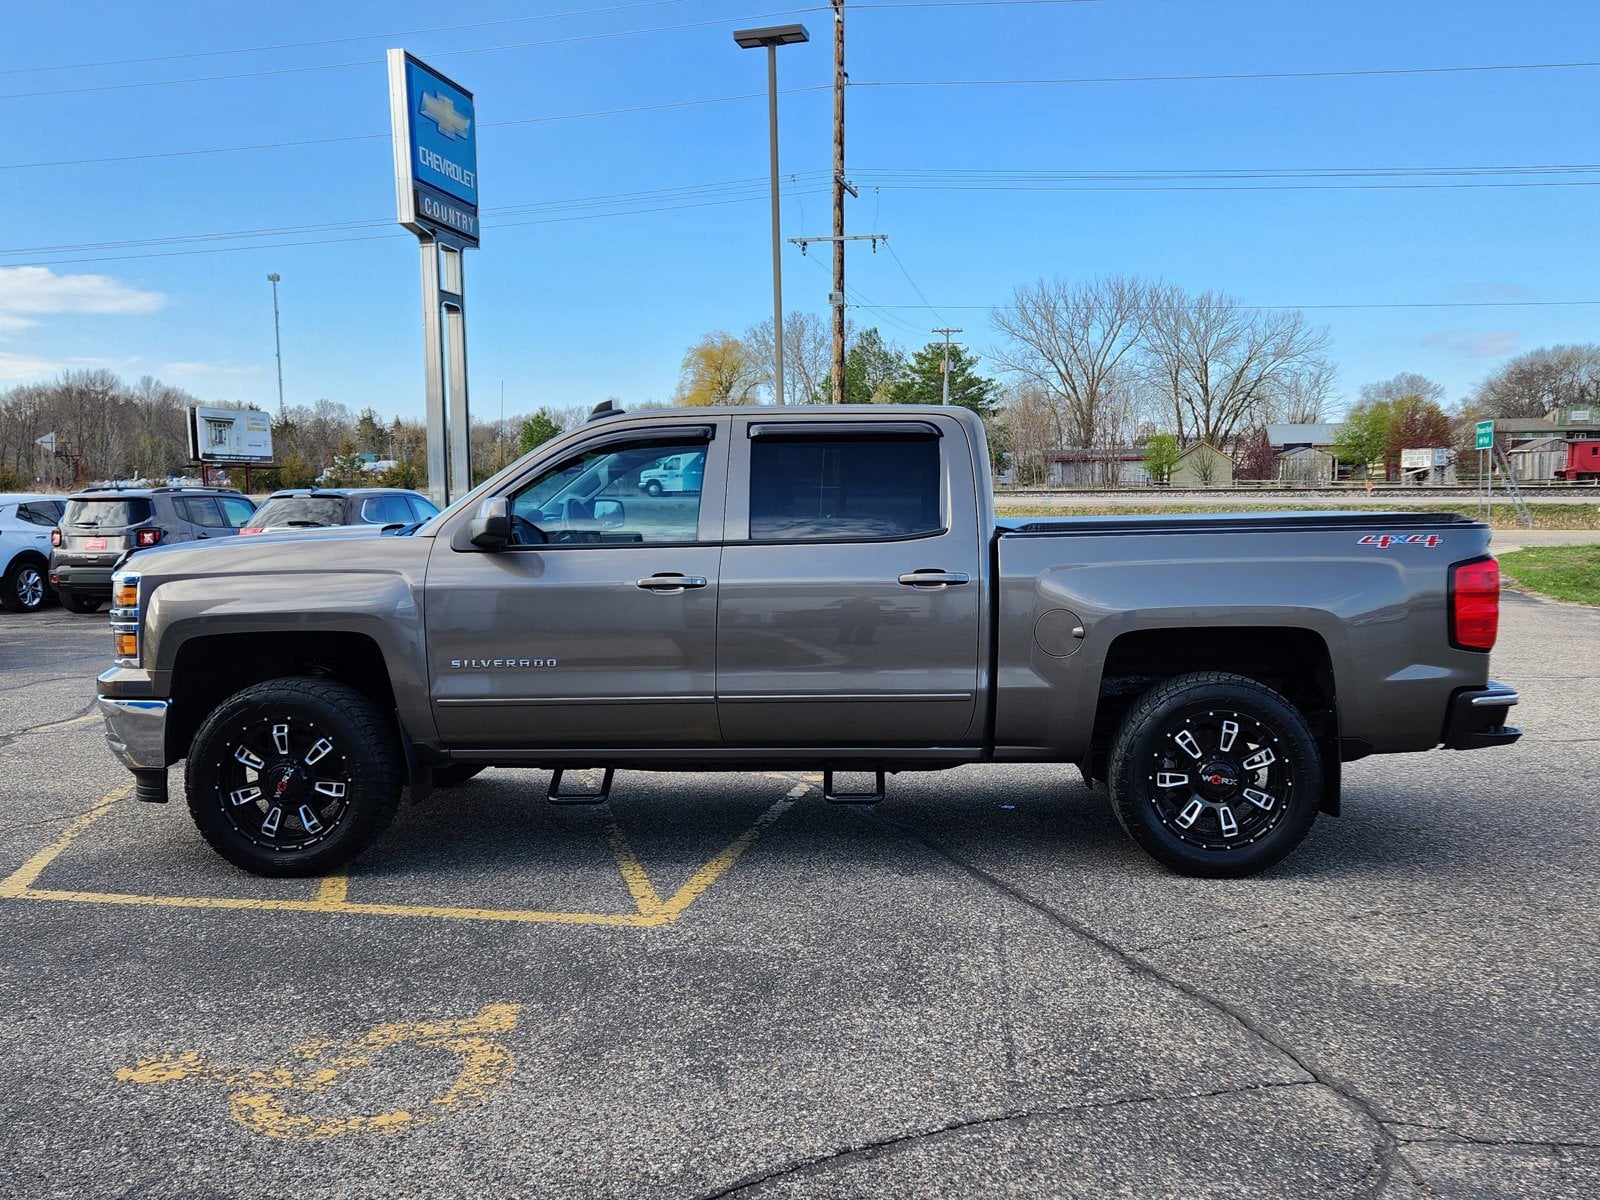 Used 2015 Chevrolet Silverado 1500 LT with VIN 3GCUKRECXFG393125 for sale in Annandale, Minnesota